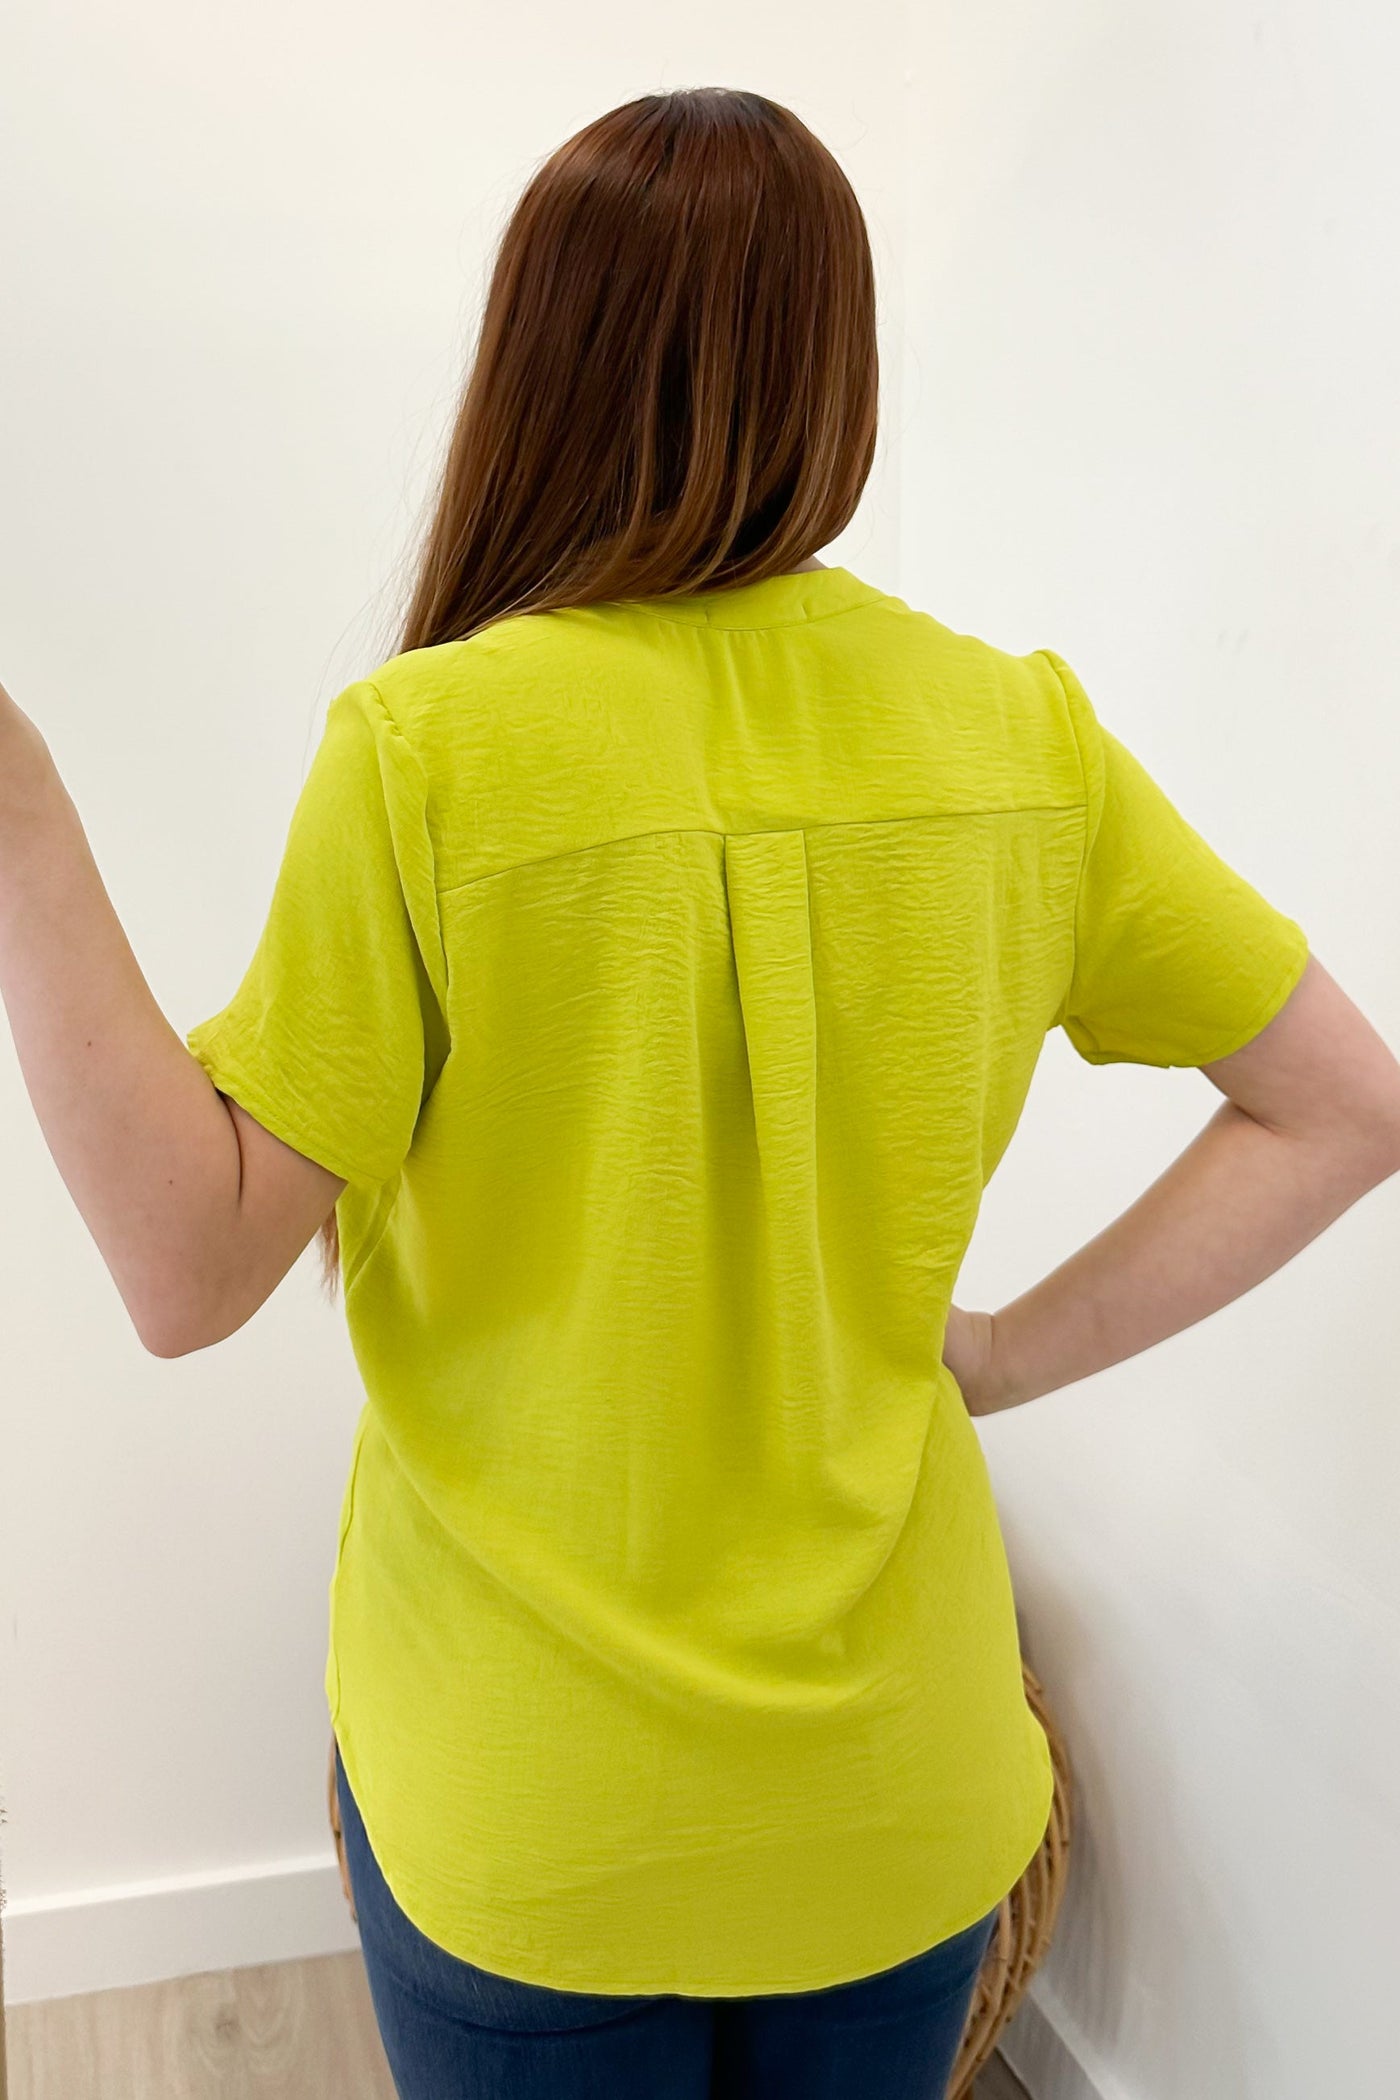 "Gathered Together" Top (Lime) - Happily Ever Aften